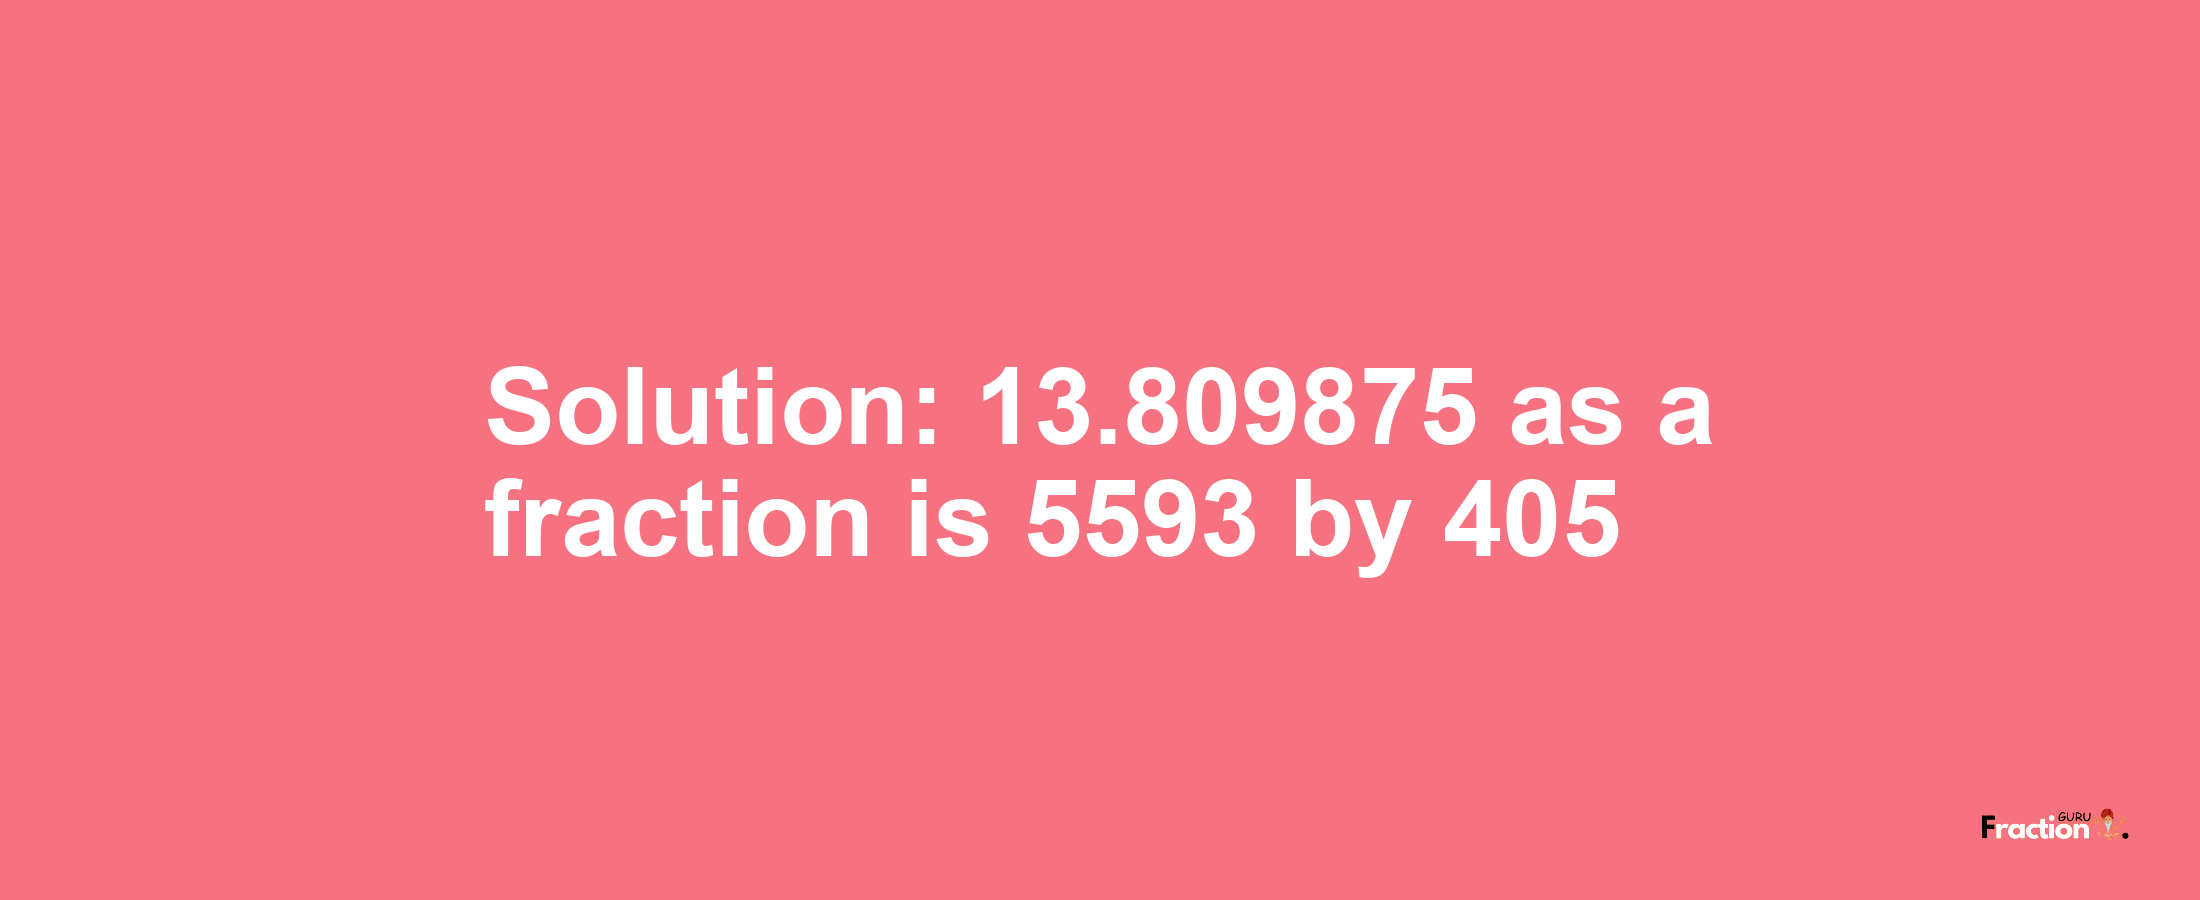 Solution:13.809875 as a fraction is 5593/405